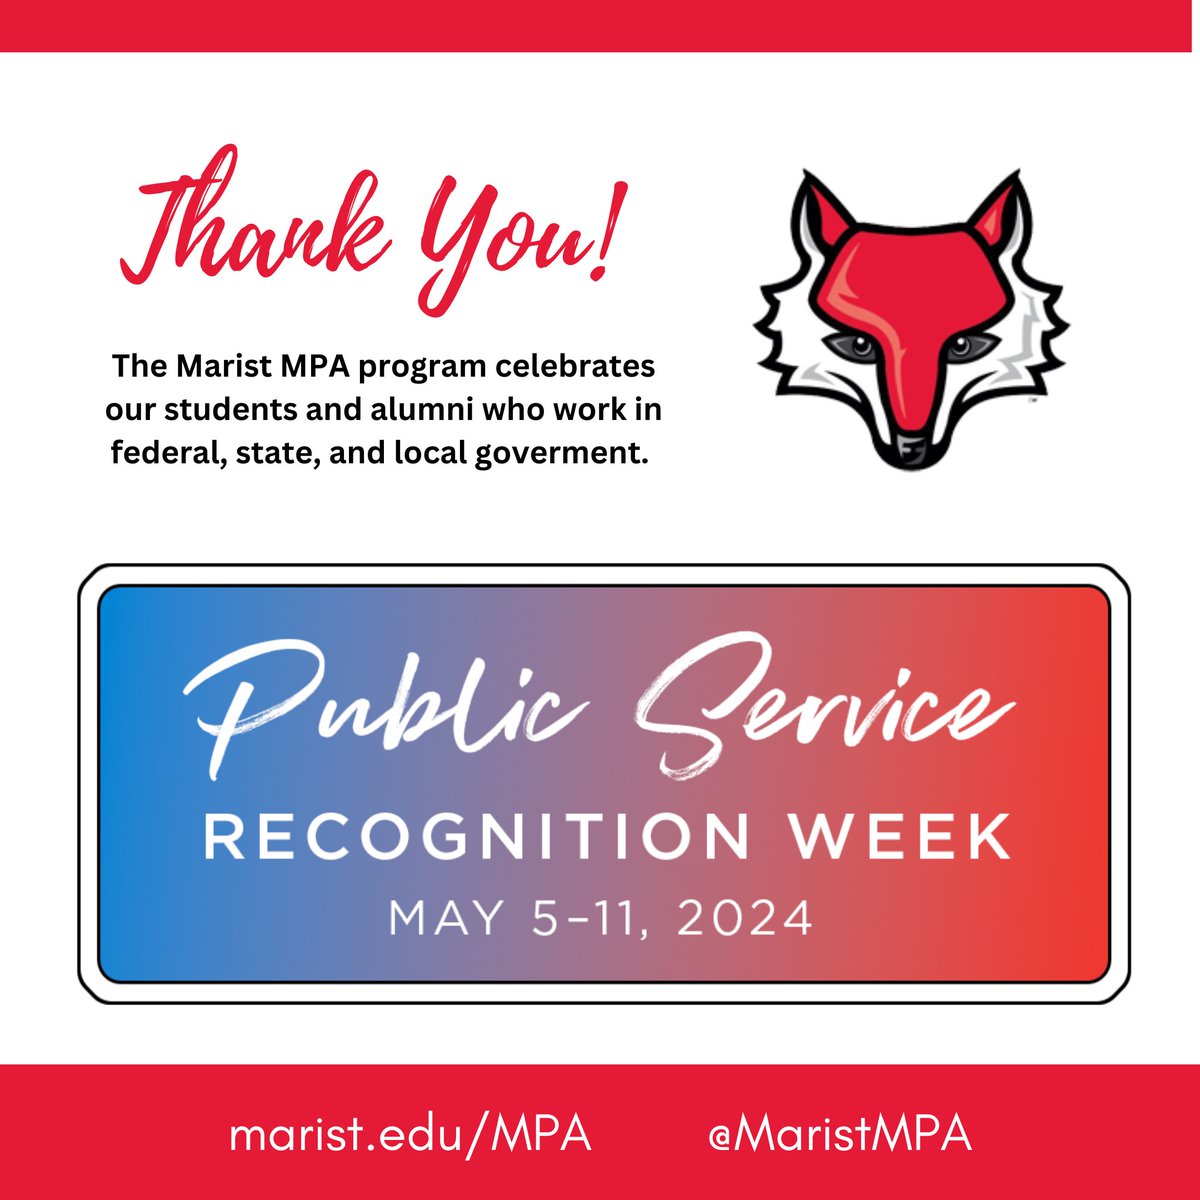 The Marist MPA program is proud to celebrate Public Service Recognition Week 2024. We're grateful for the the skills and knowledge that our students and alumni bring to federal, state, and local government every day. #PSRW2024